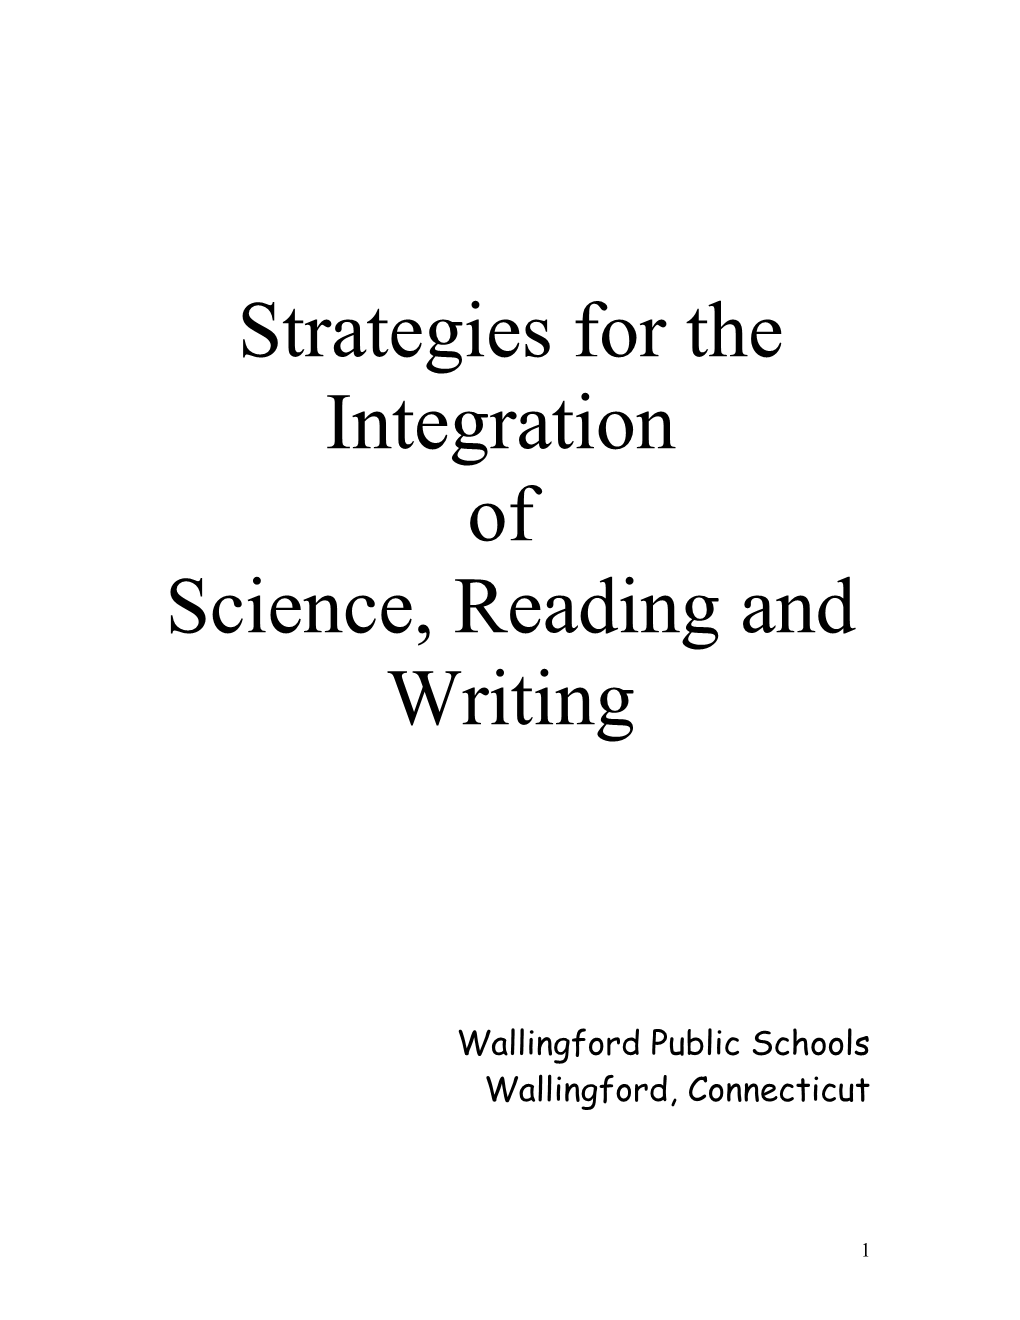 Strategies for the Integration